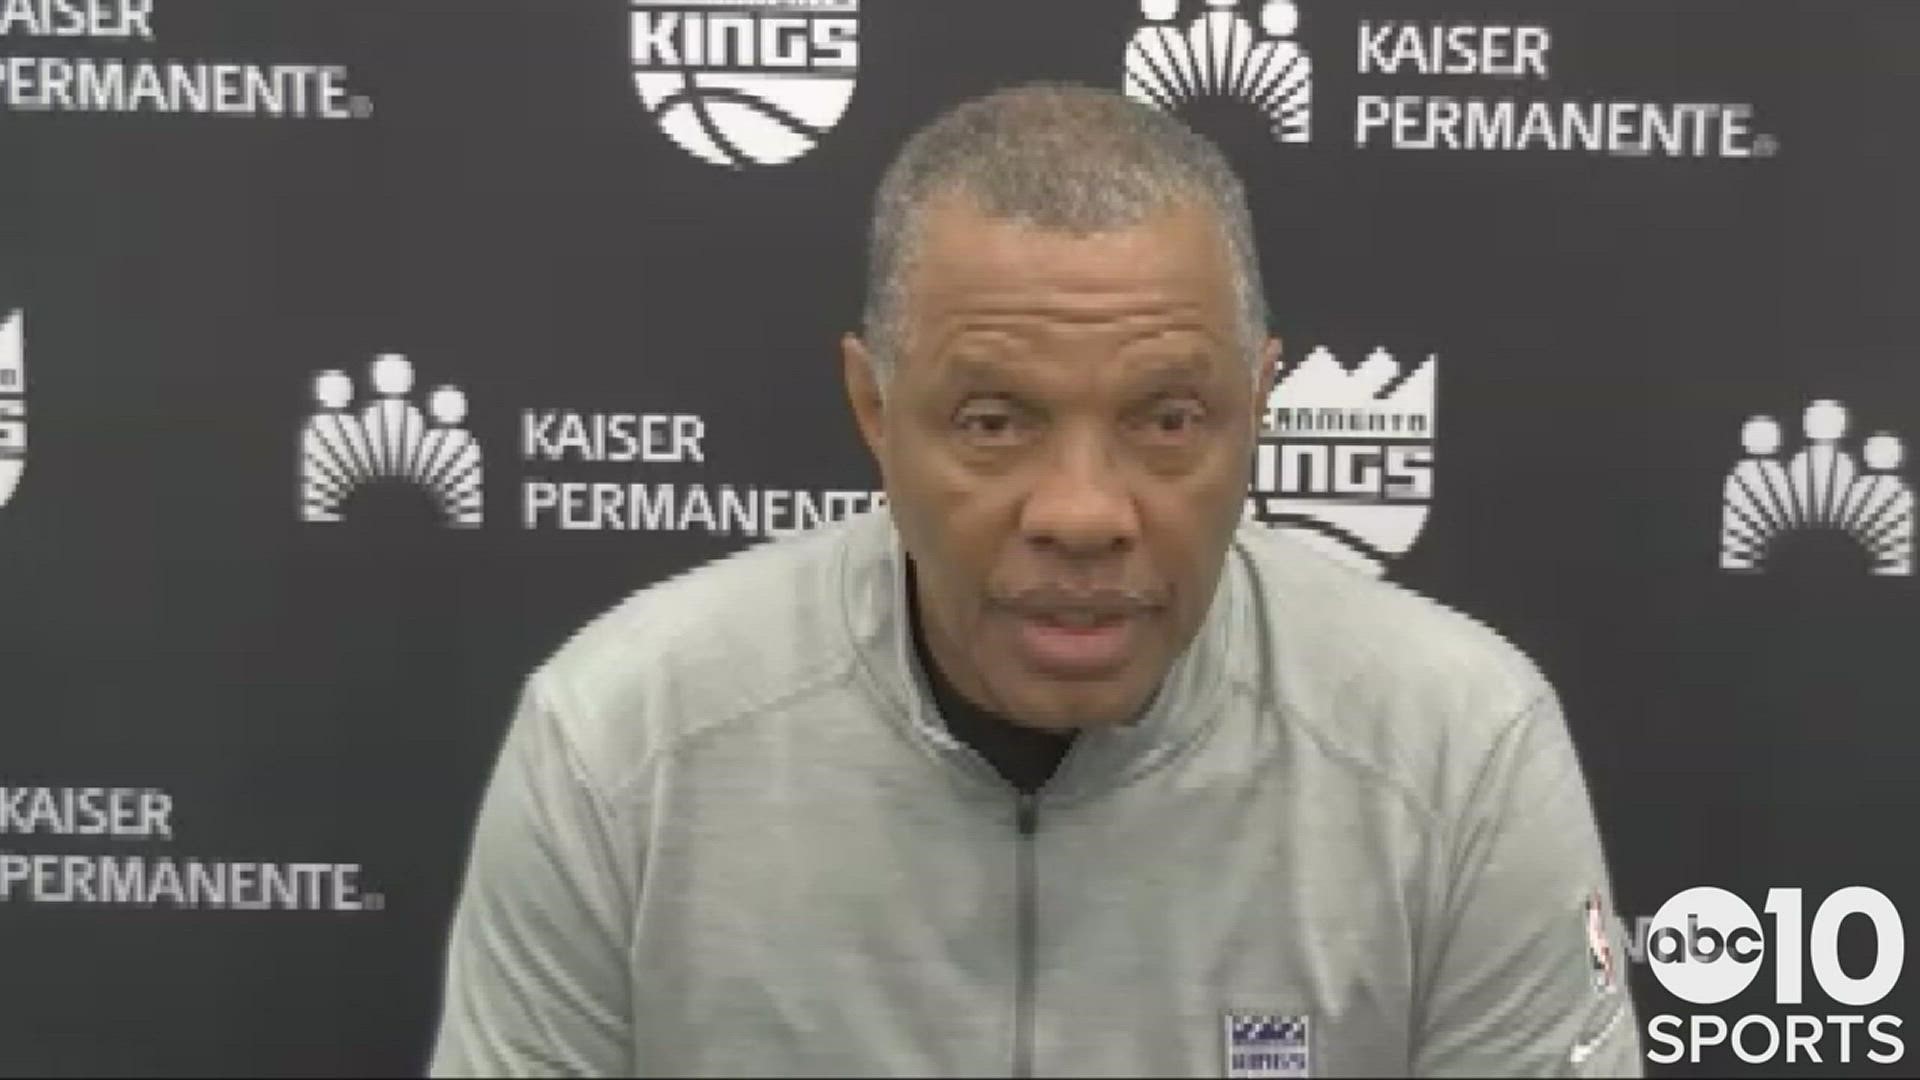 Following a season finale victory over the Suns in Phoenix, Kings interim head coach Alvin Gentry talks about the uncertain future with Sacramento.